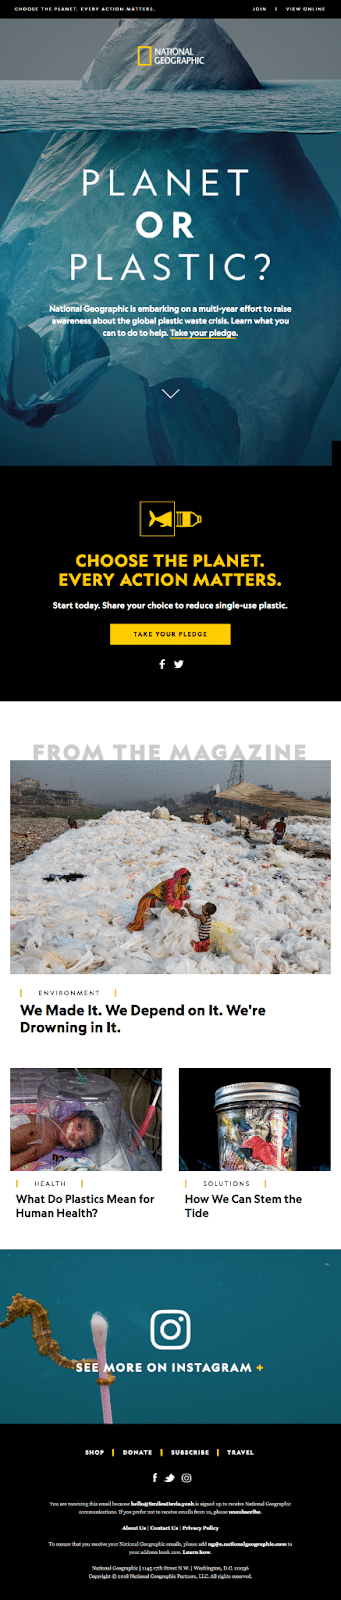 National Geographic email newsletter example